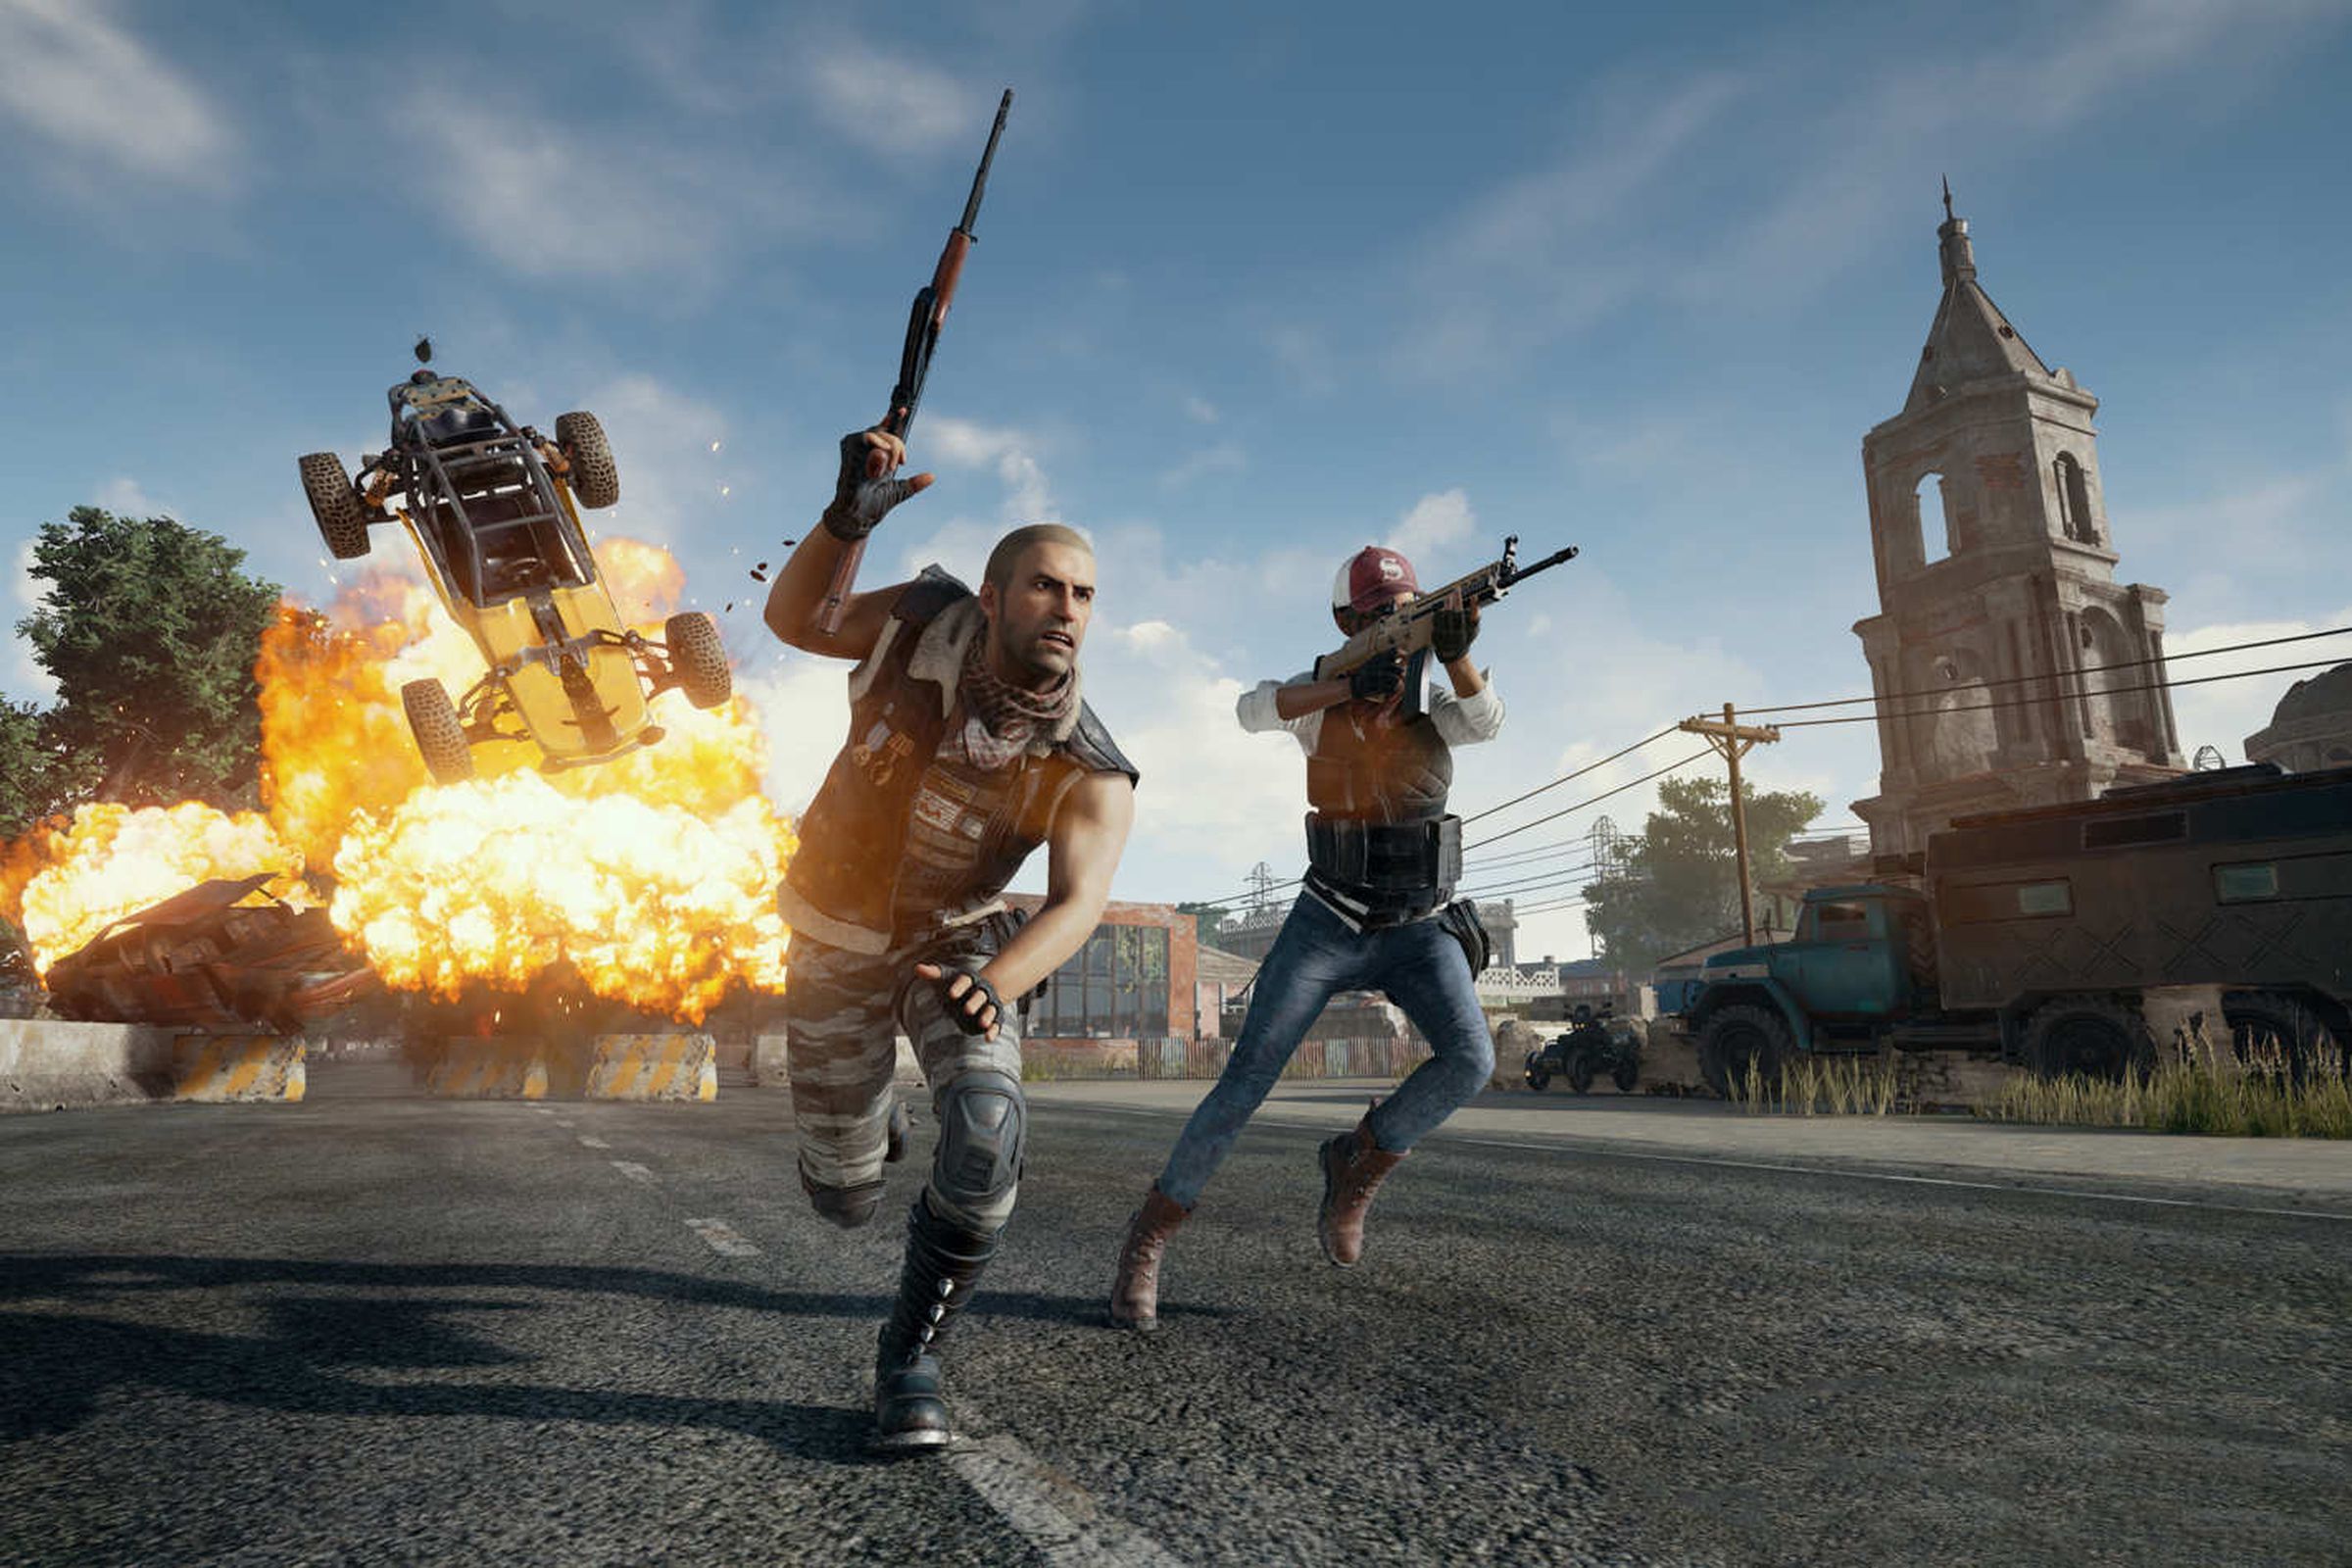 PlayerUnknown’s Battlegrounds or PUBG is one of the world’s most popular — and profitable — video games. 